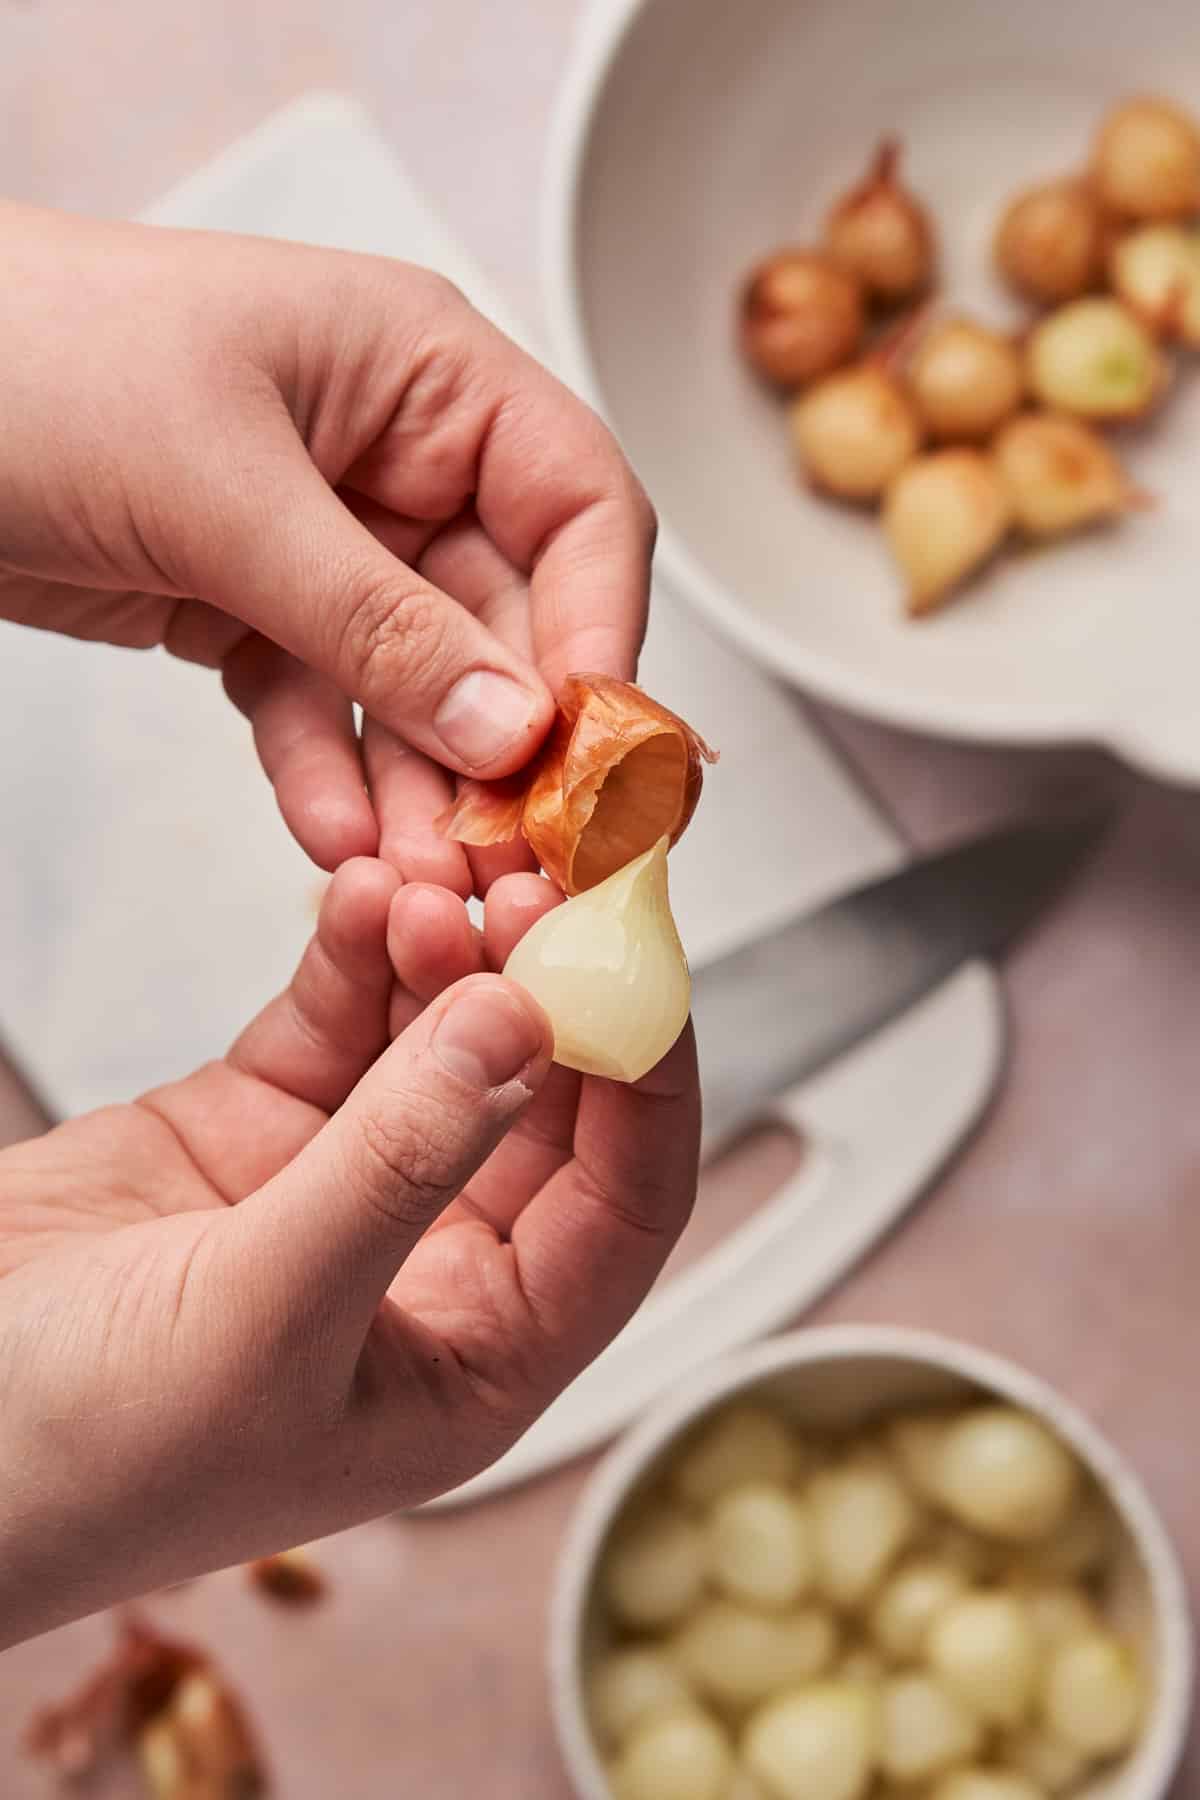 hands holding a pearl onion and peeling the skin off 